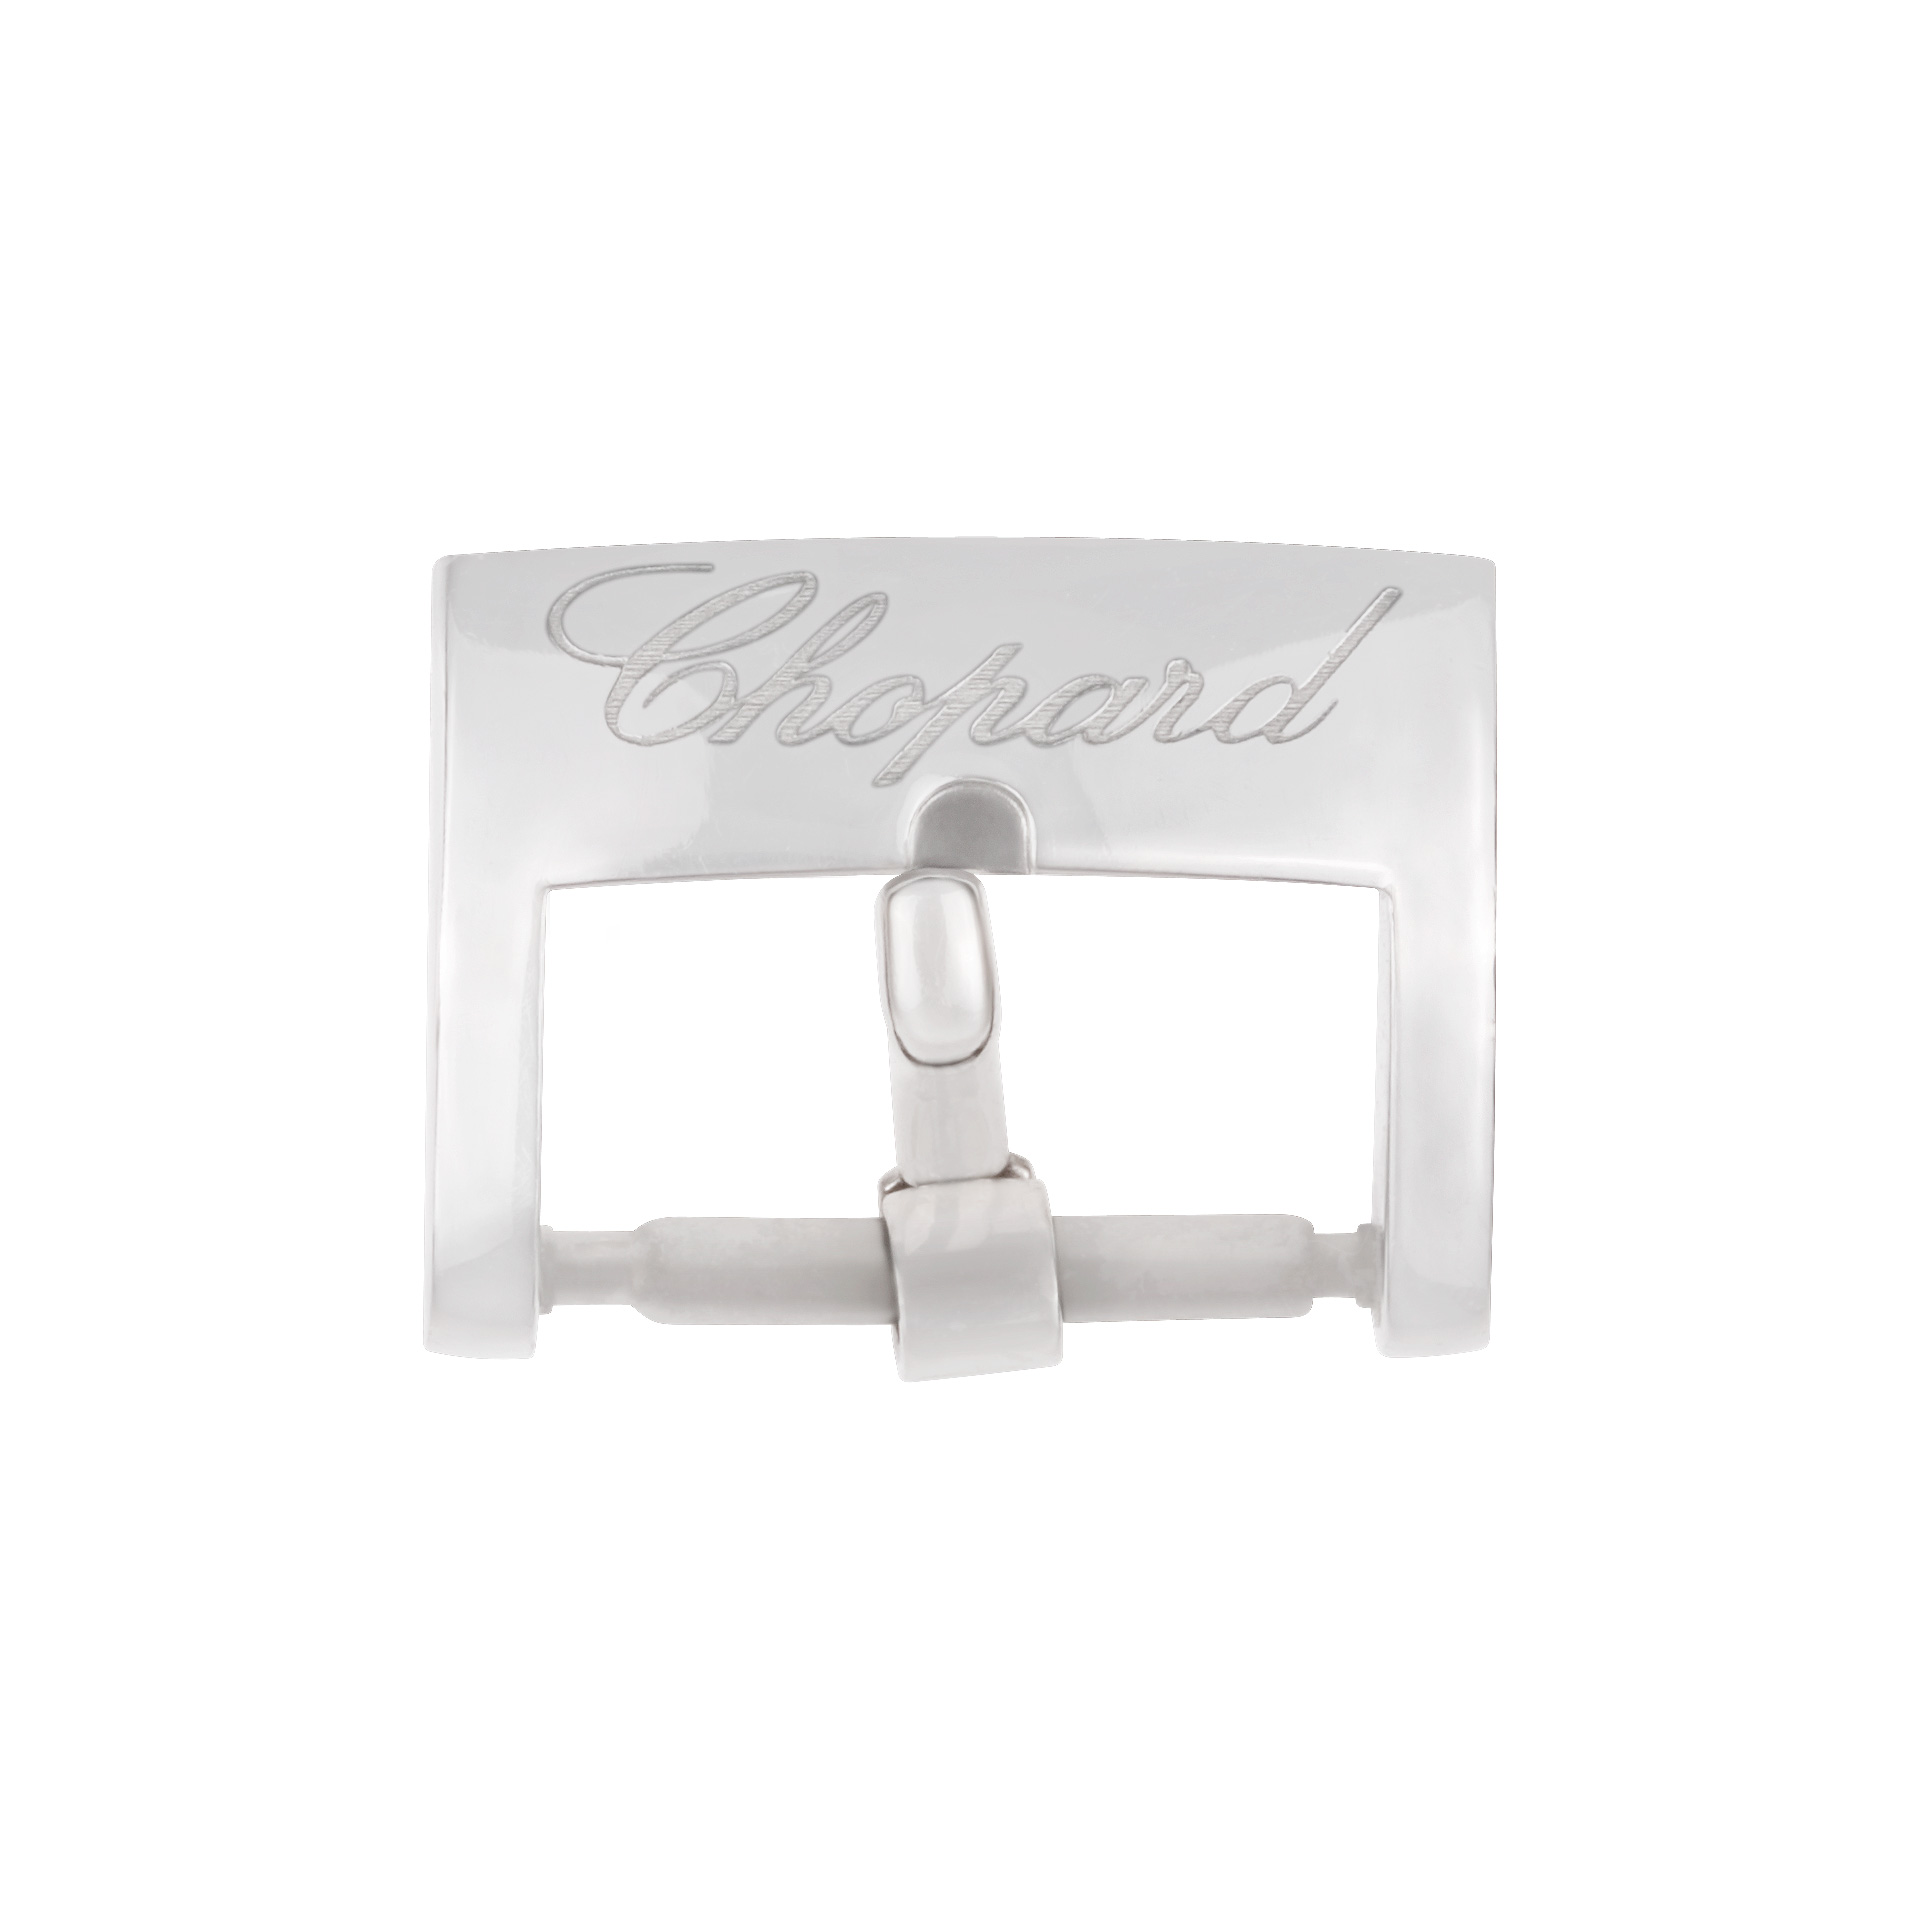 Chopard 18K white gold buckle image 1